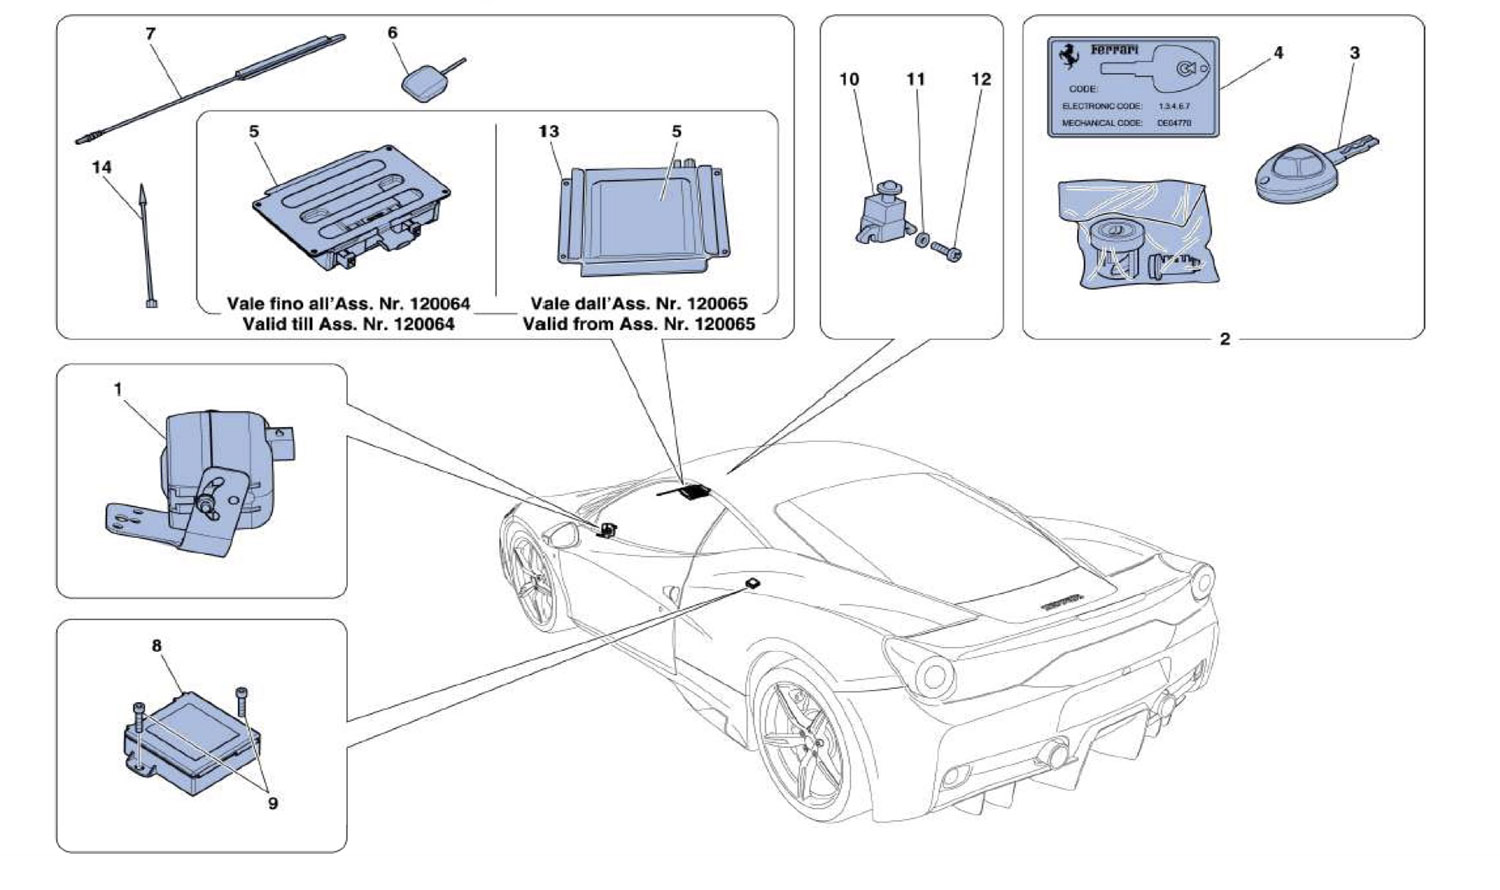 Schematic: Anti-Theft Devices